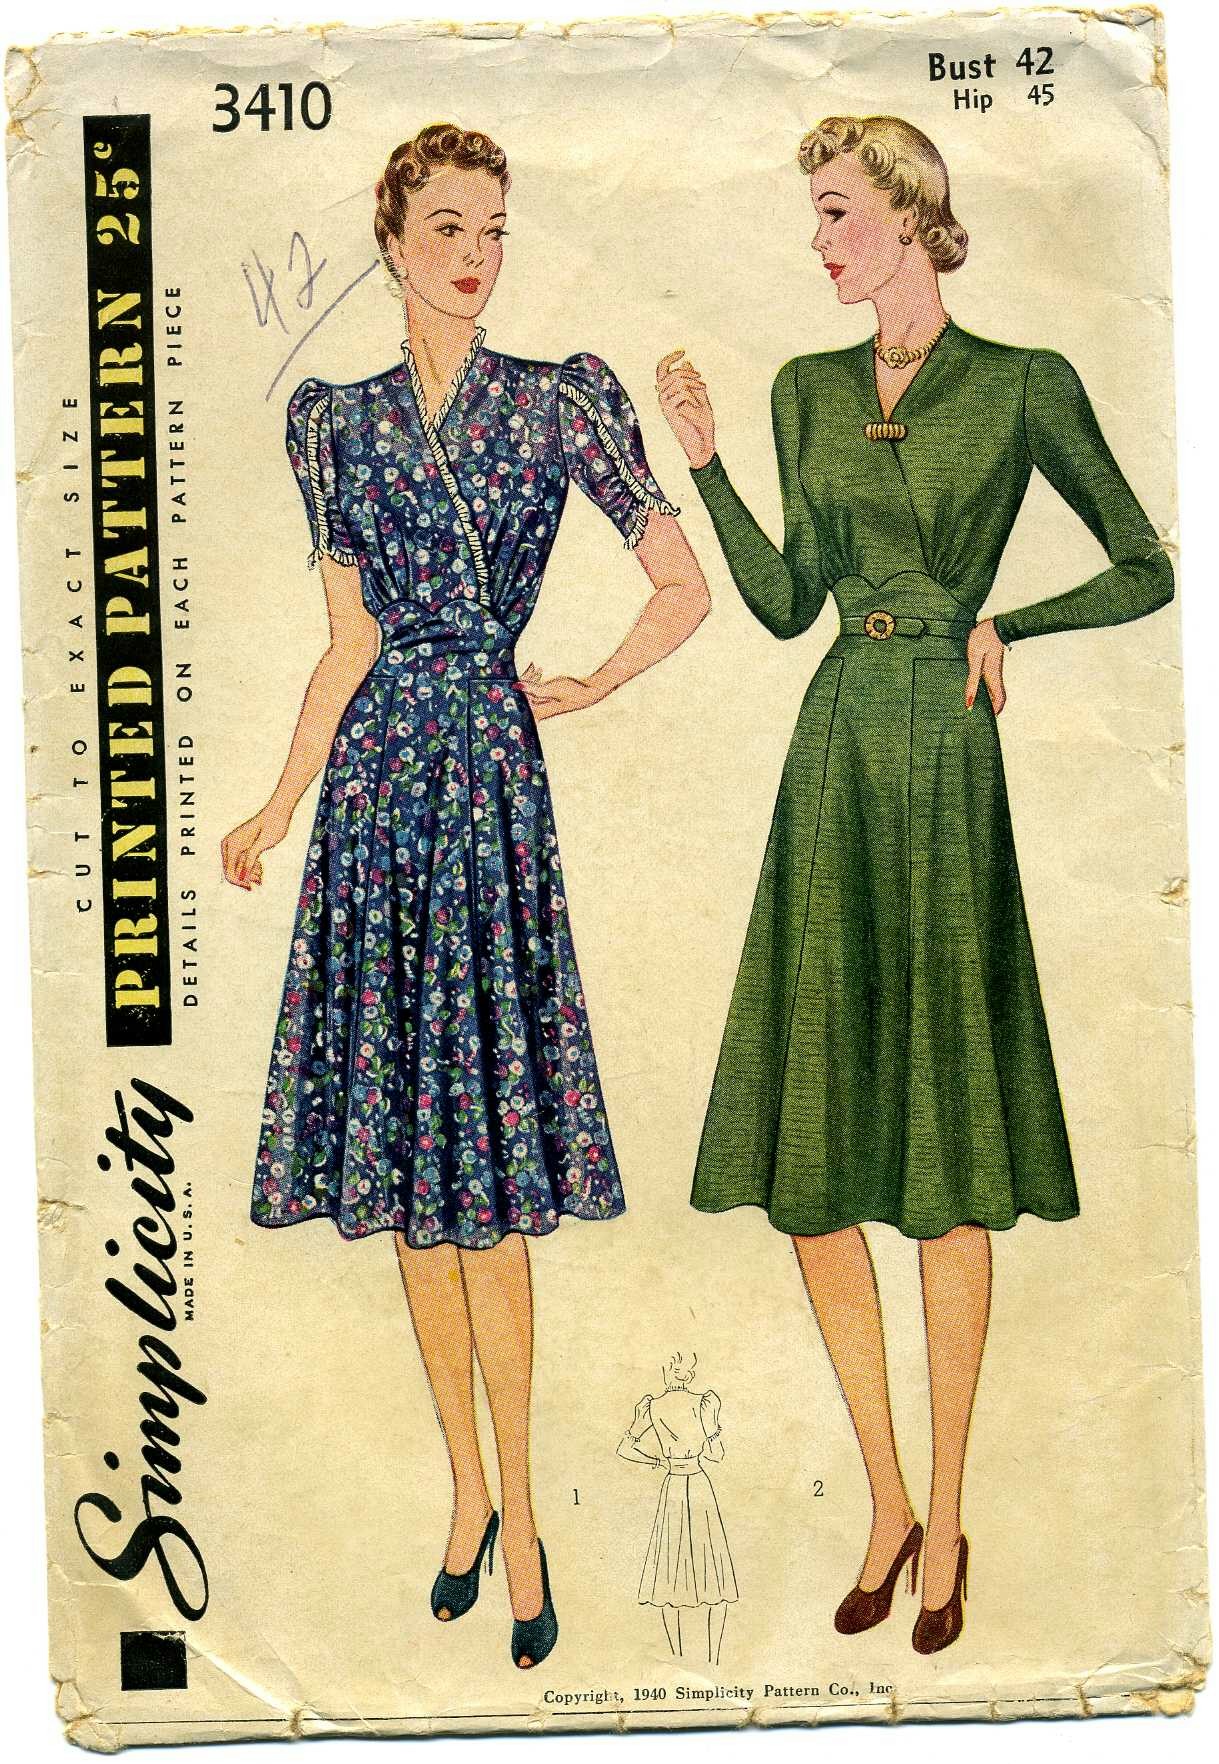 Simplicity 3410 A - Vintage Sewing Patterns